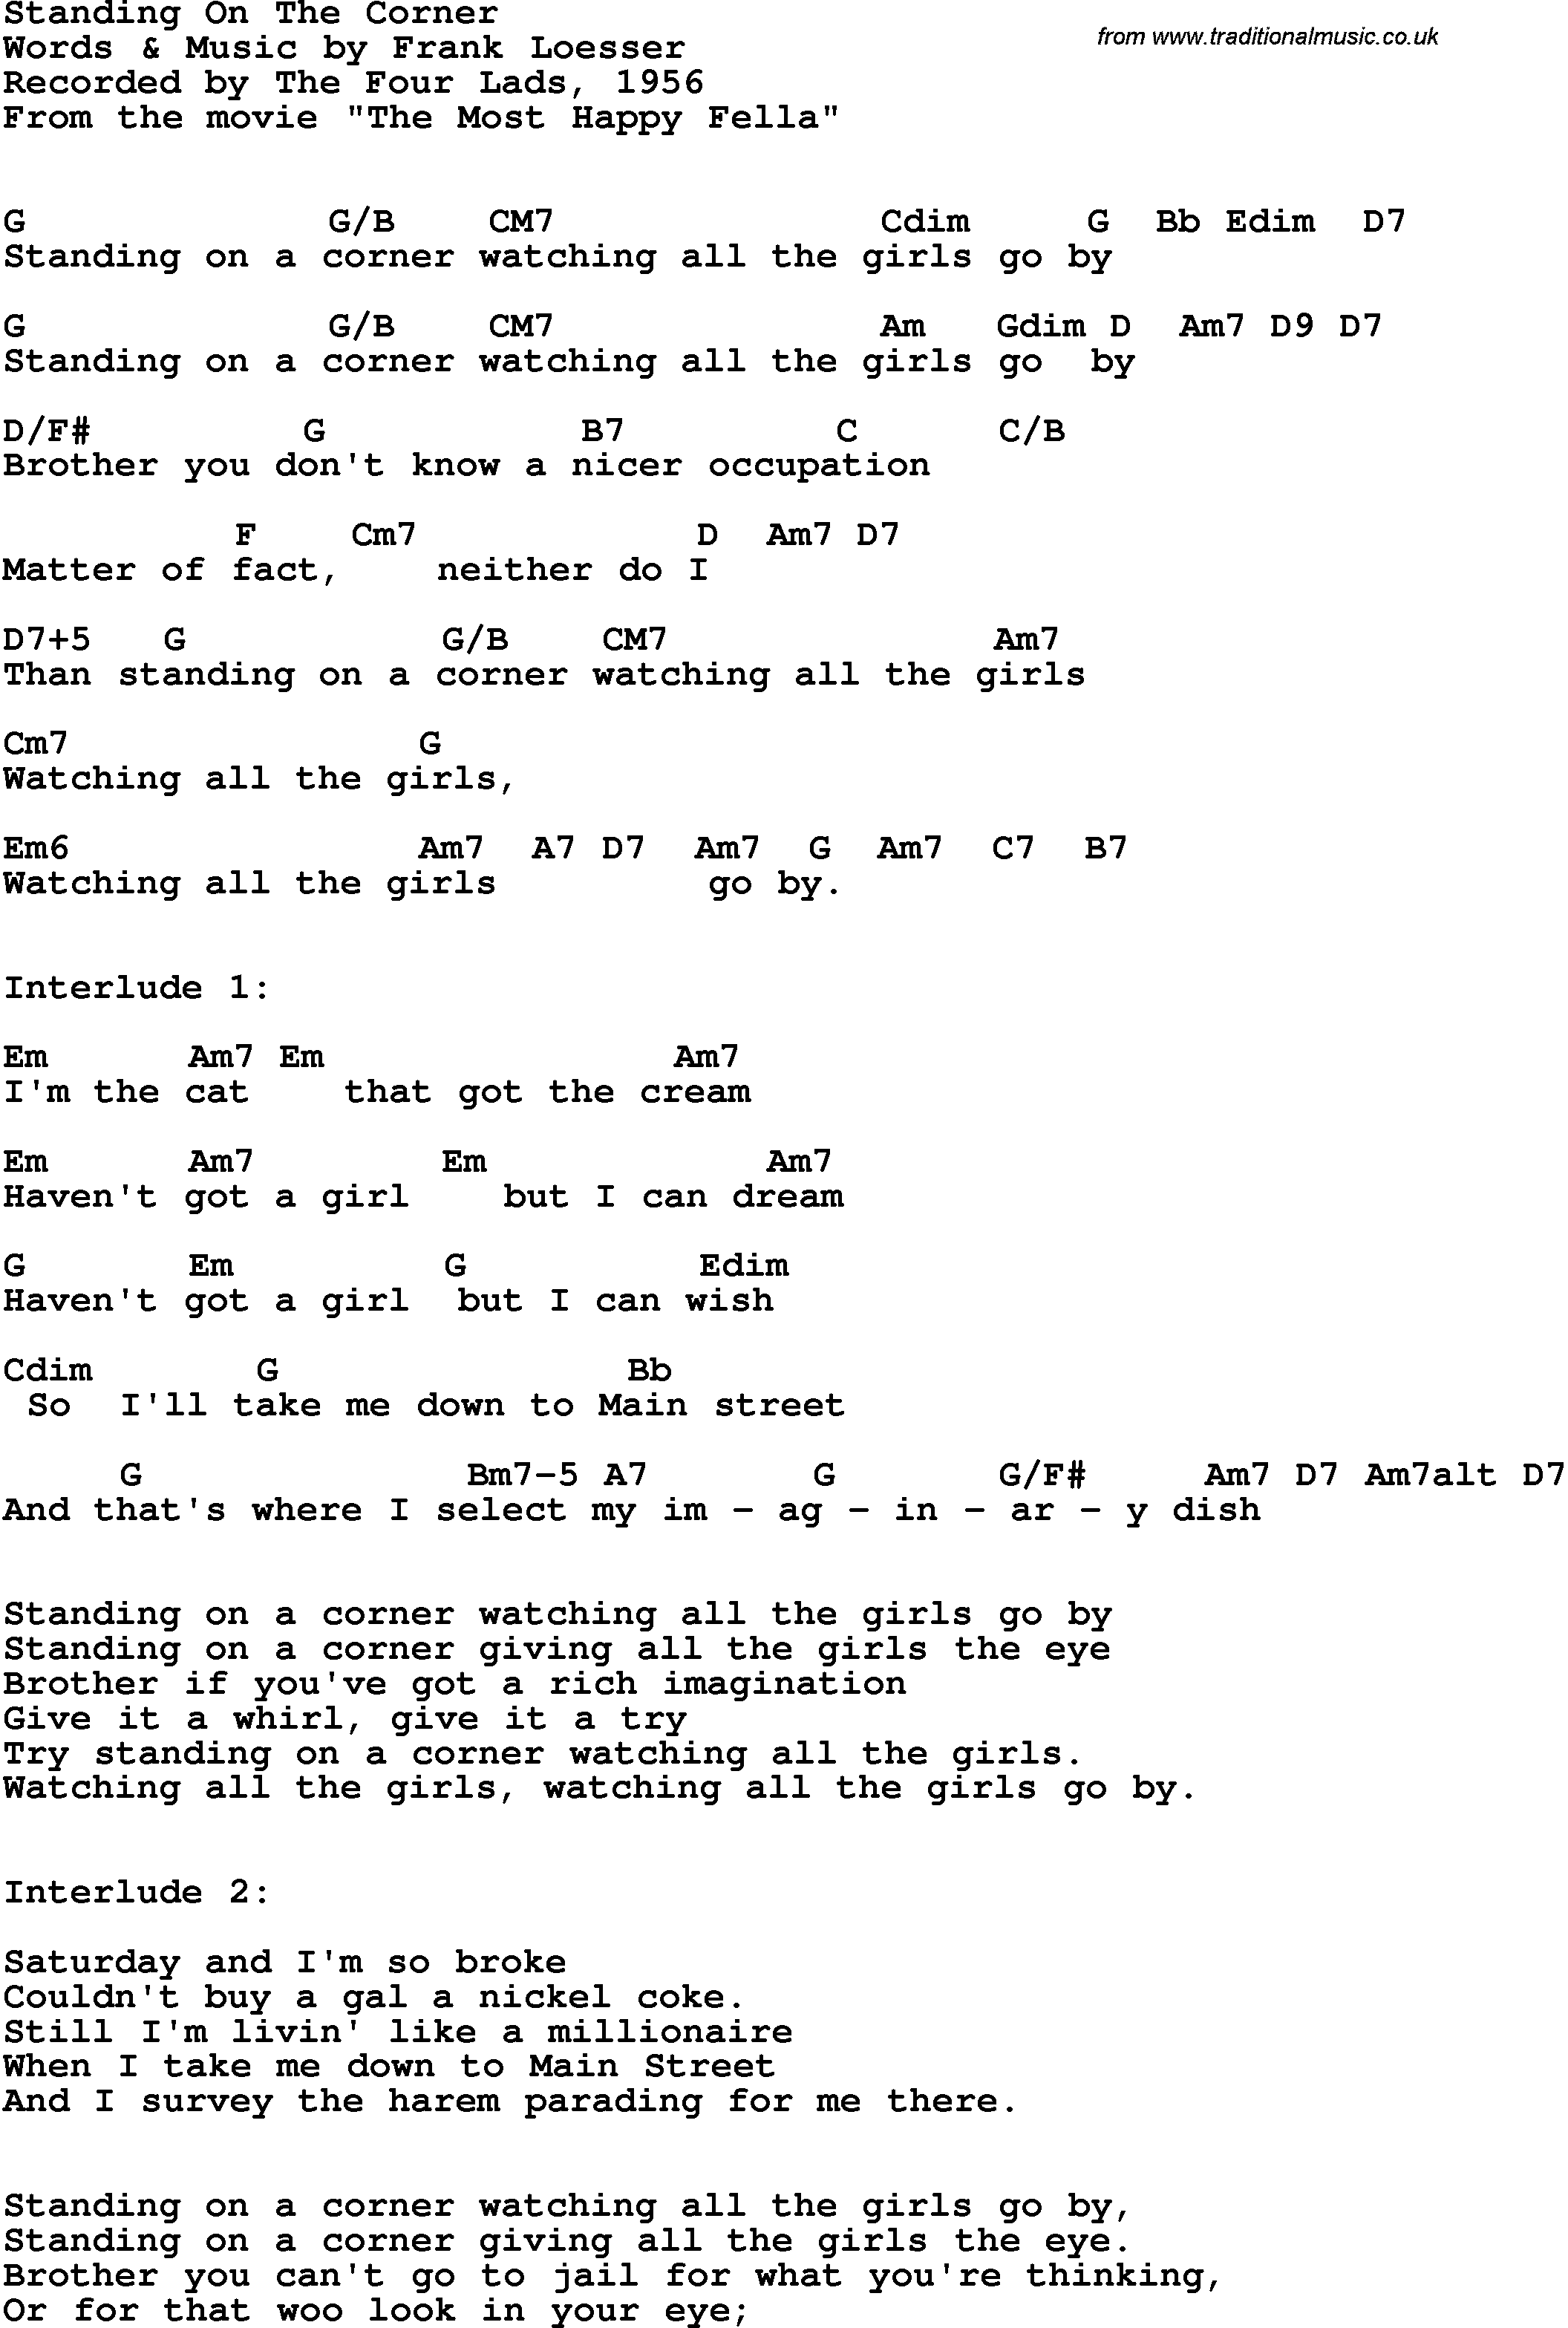 Song Lyrics with guitar chords for Standing On The Corner - The Four Lads, 1956